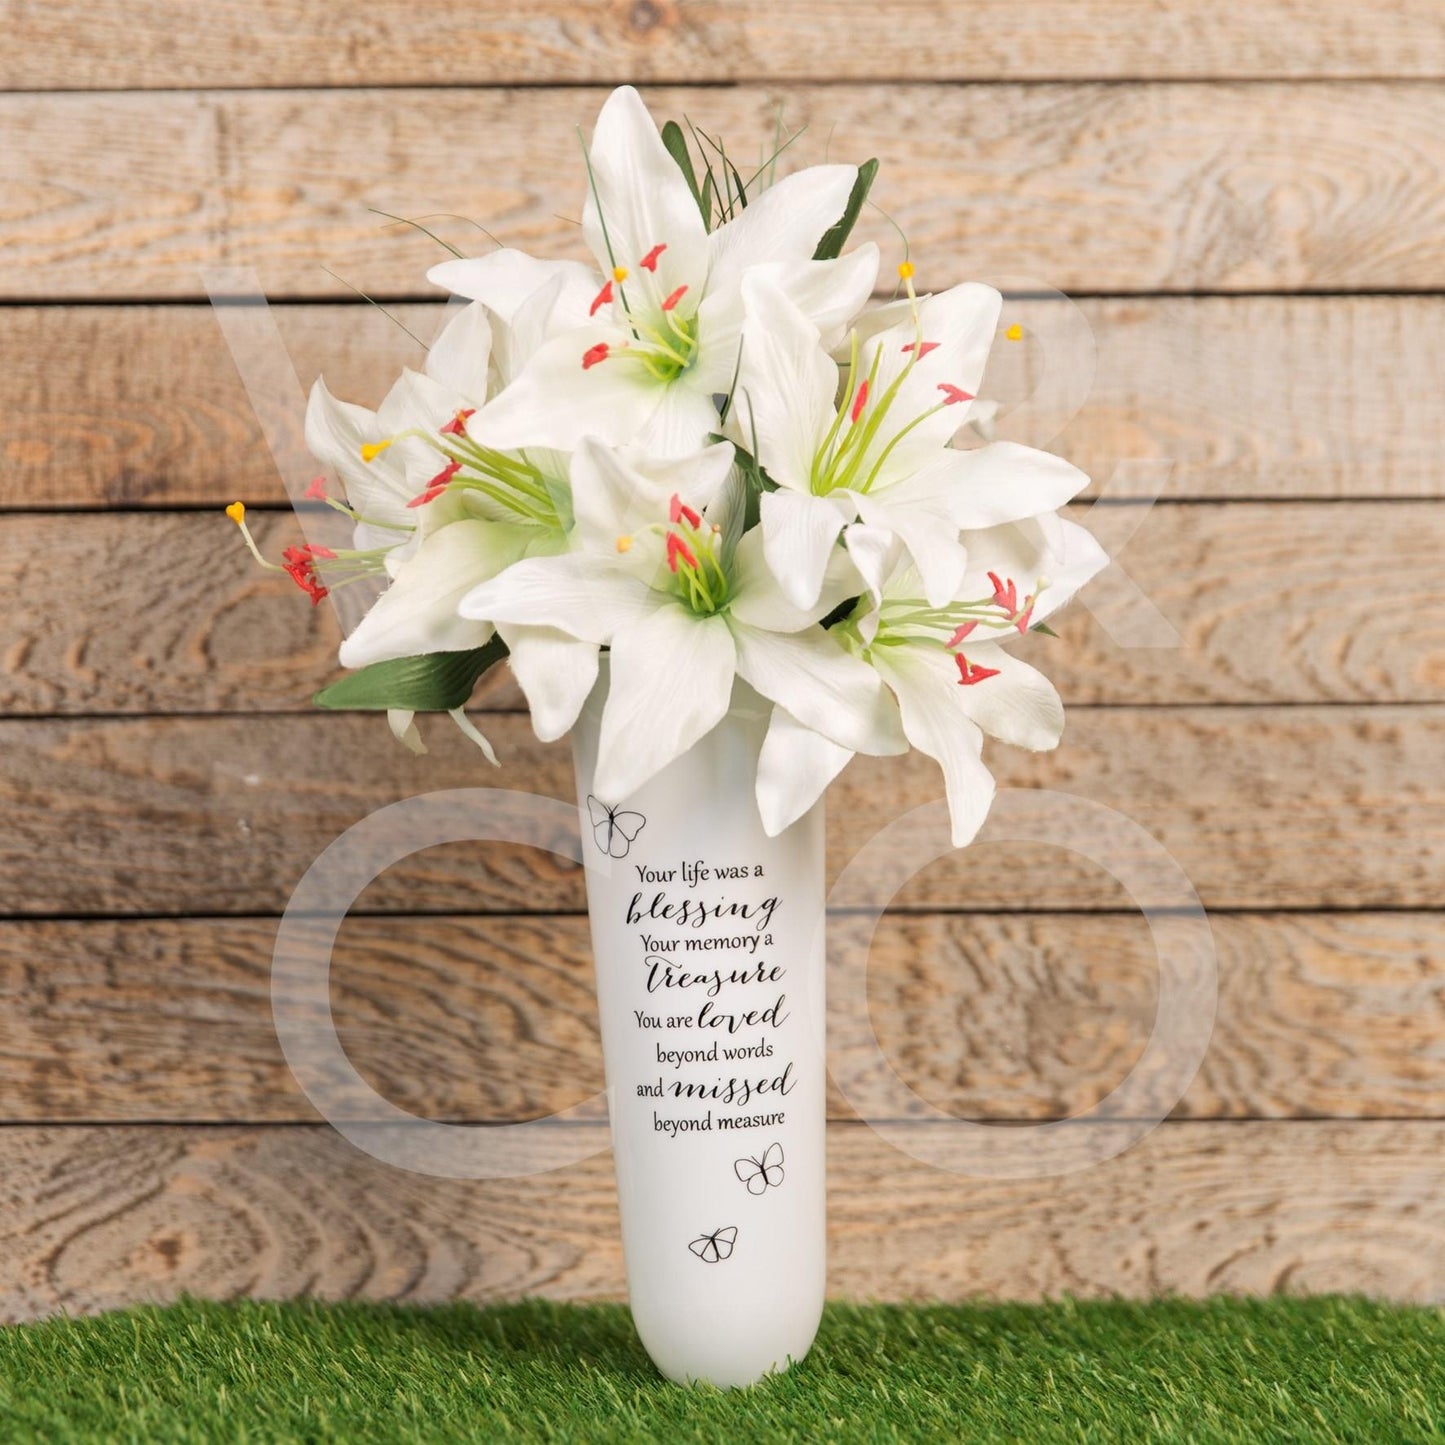 Thoughts Of You 'Life With A Blessing' Vase